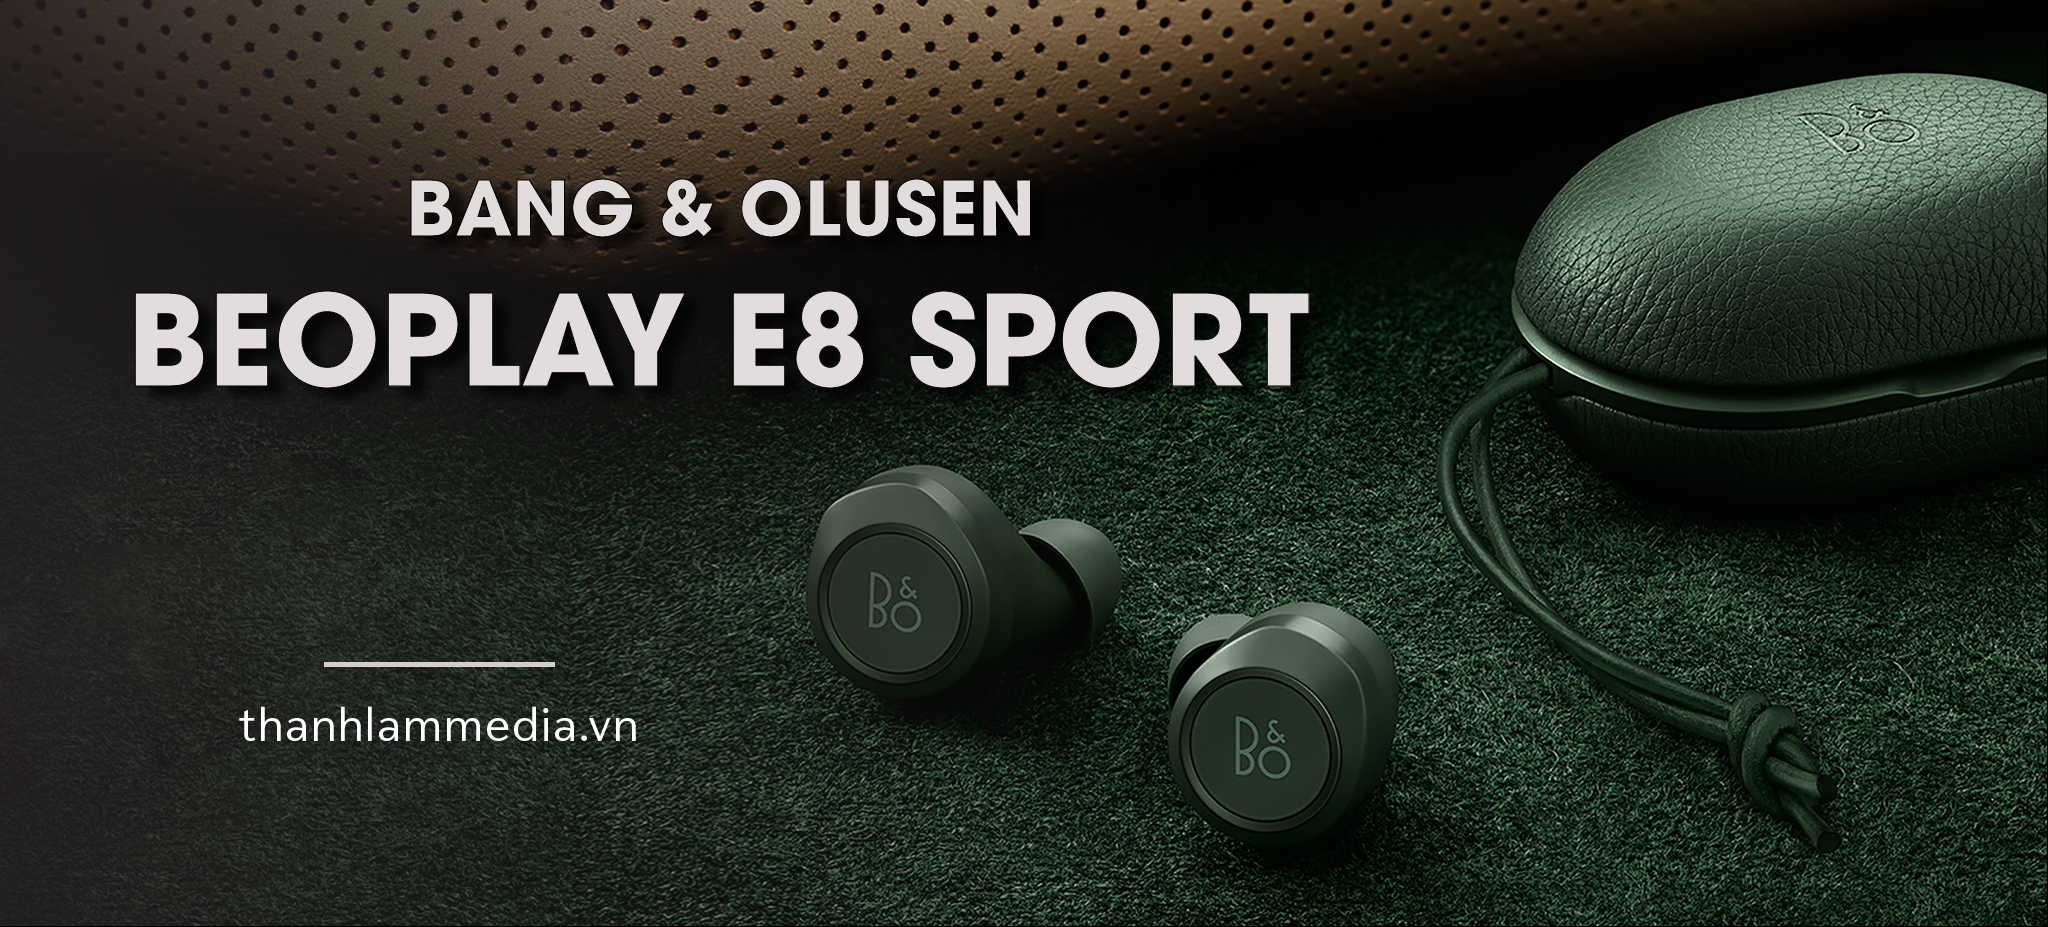 Beoplay E8 Sport